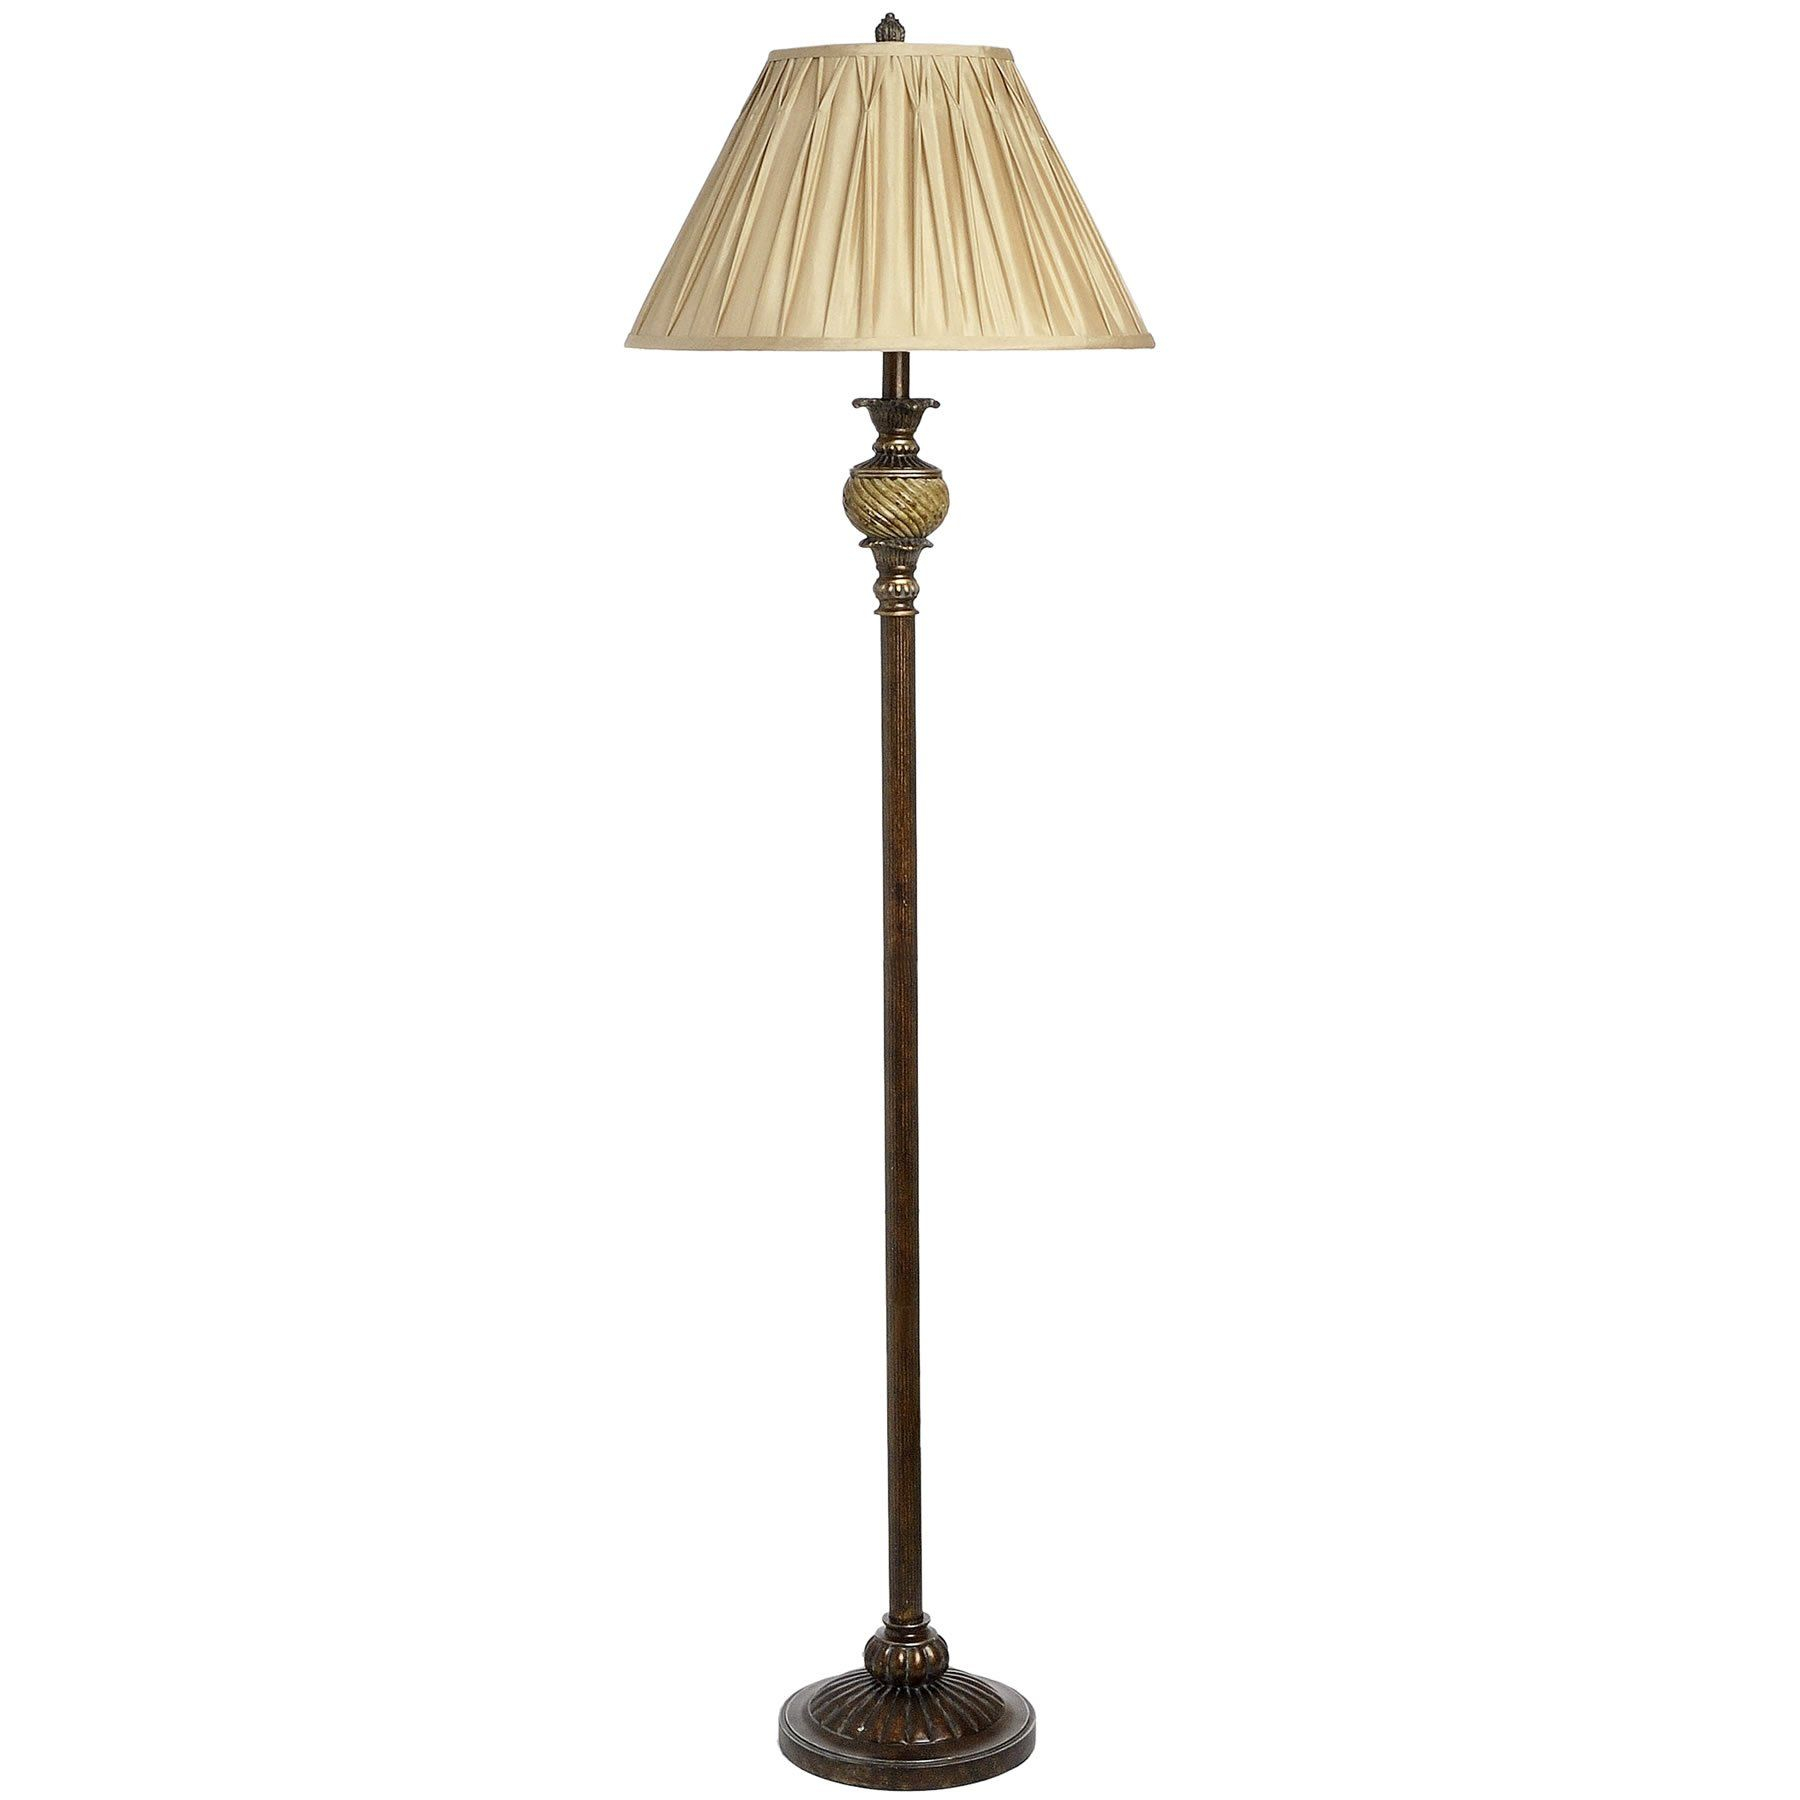 Traditional Kendal Floor Lamp H8977 Vintage Style inside proportions 1800 X 1800